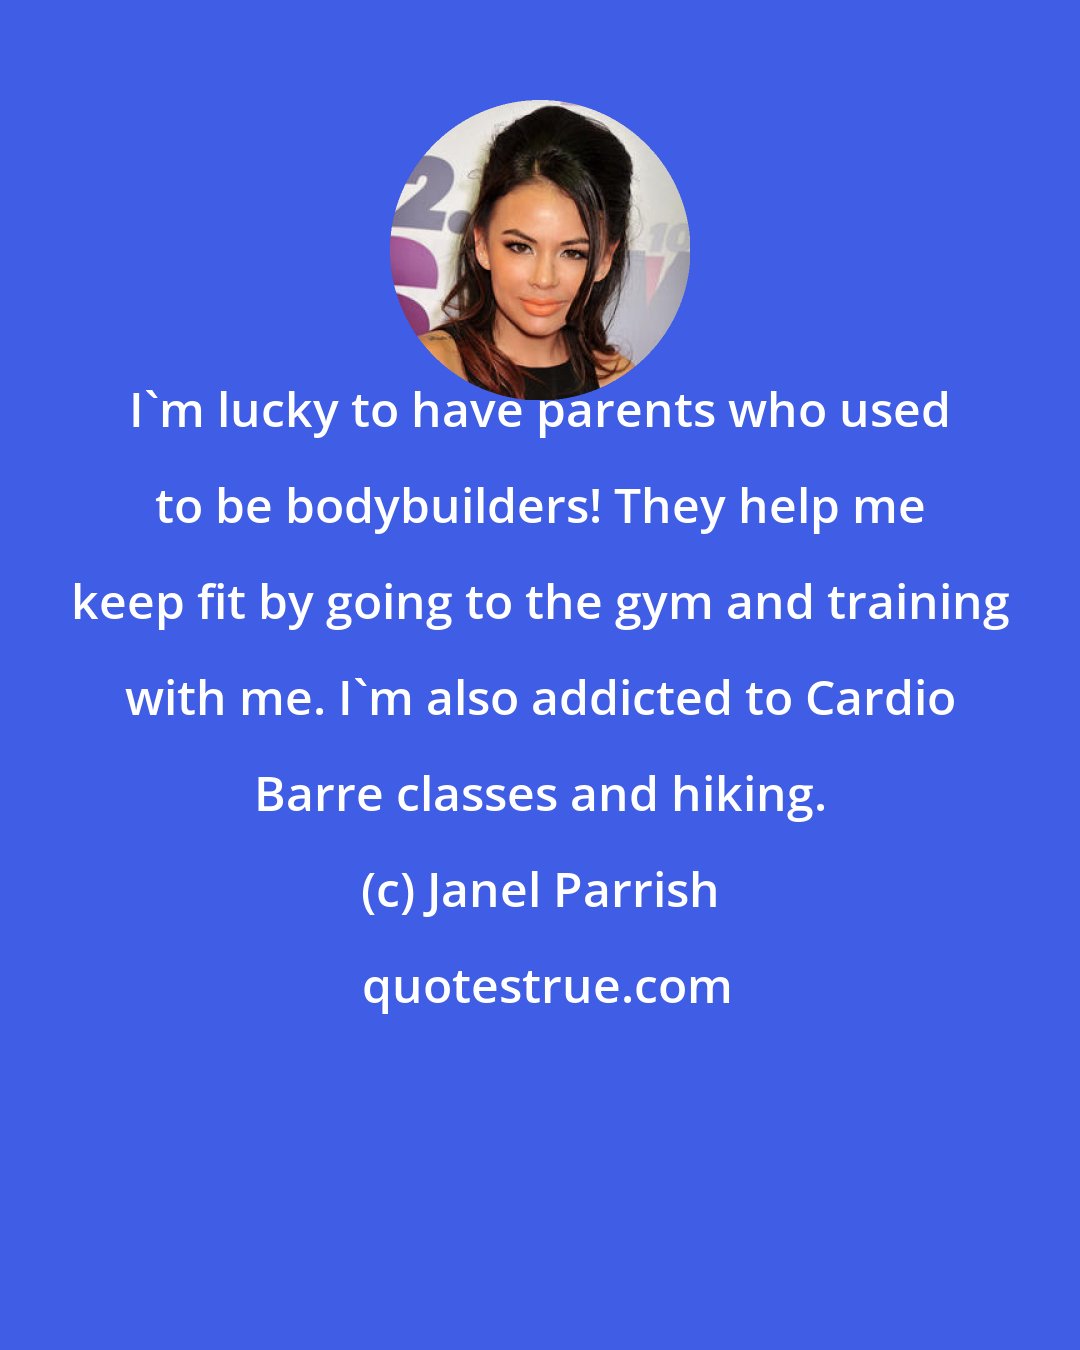 Janel Parrish: I'm lucky to have parents who used to be bodybuilders! They help me keep fit by going to the gym and training with me. I'm also addicted to Cardio Barre classes and hiking.